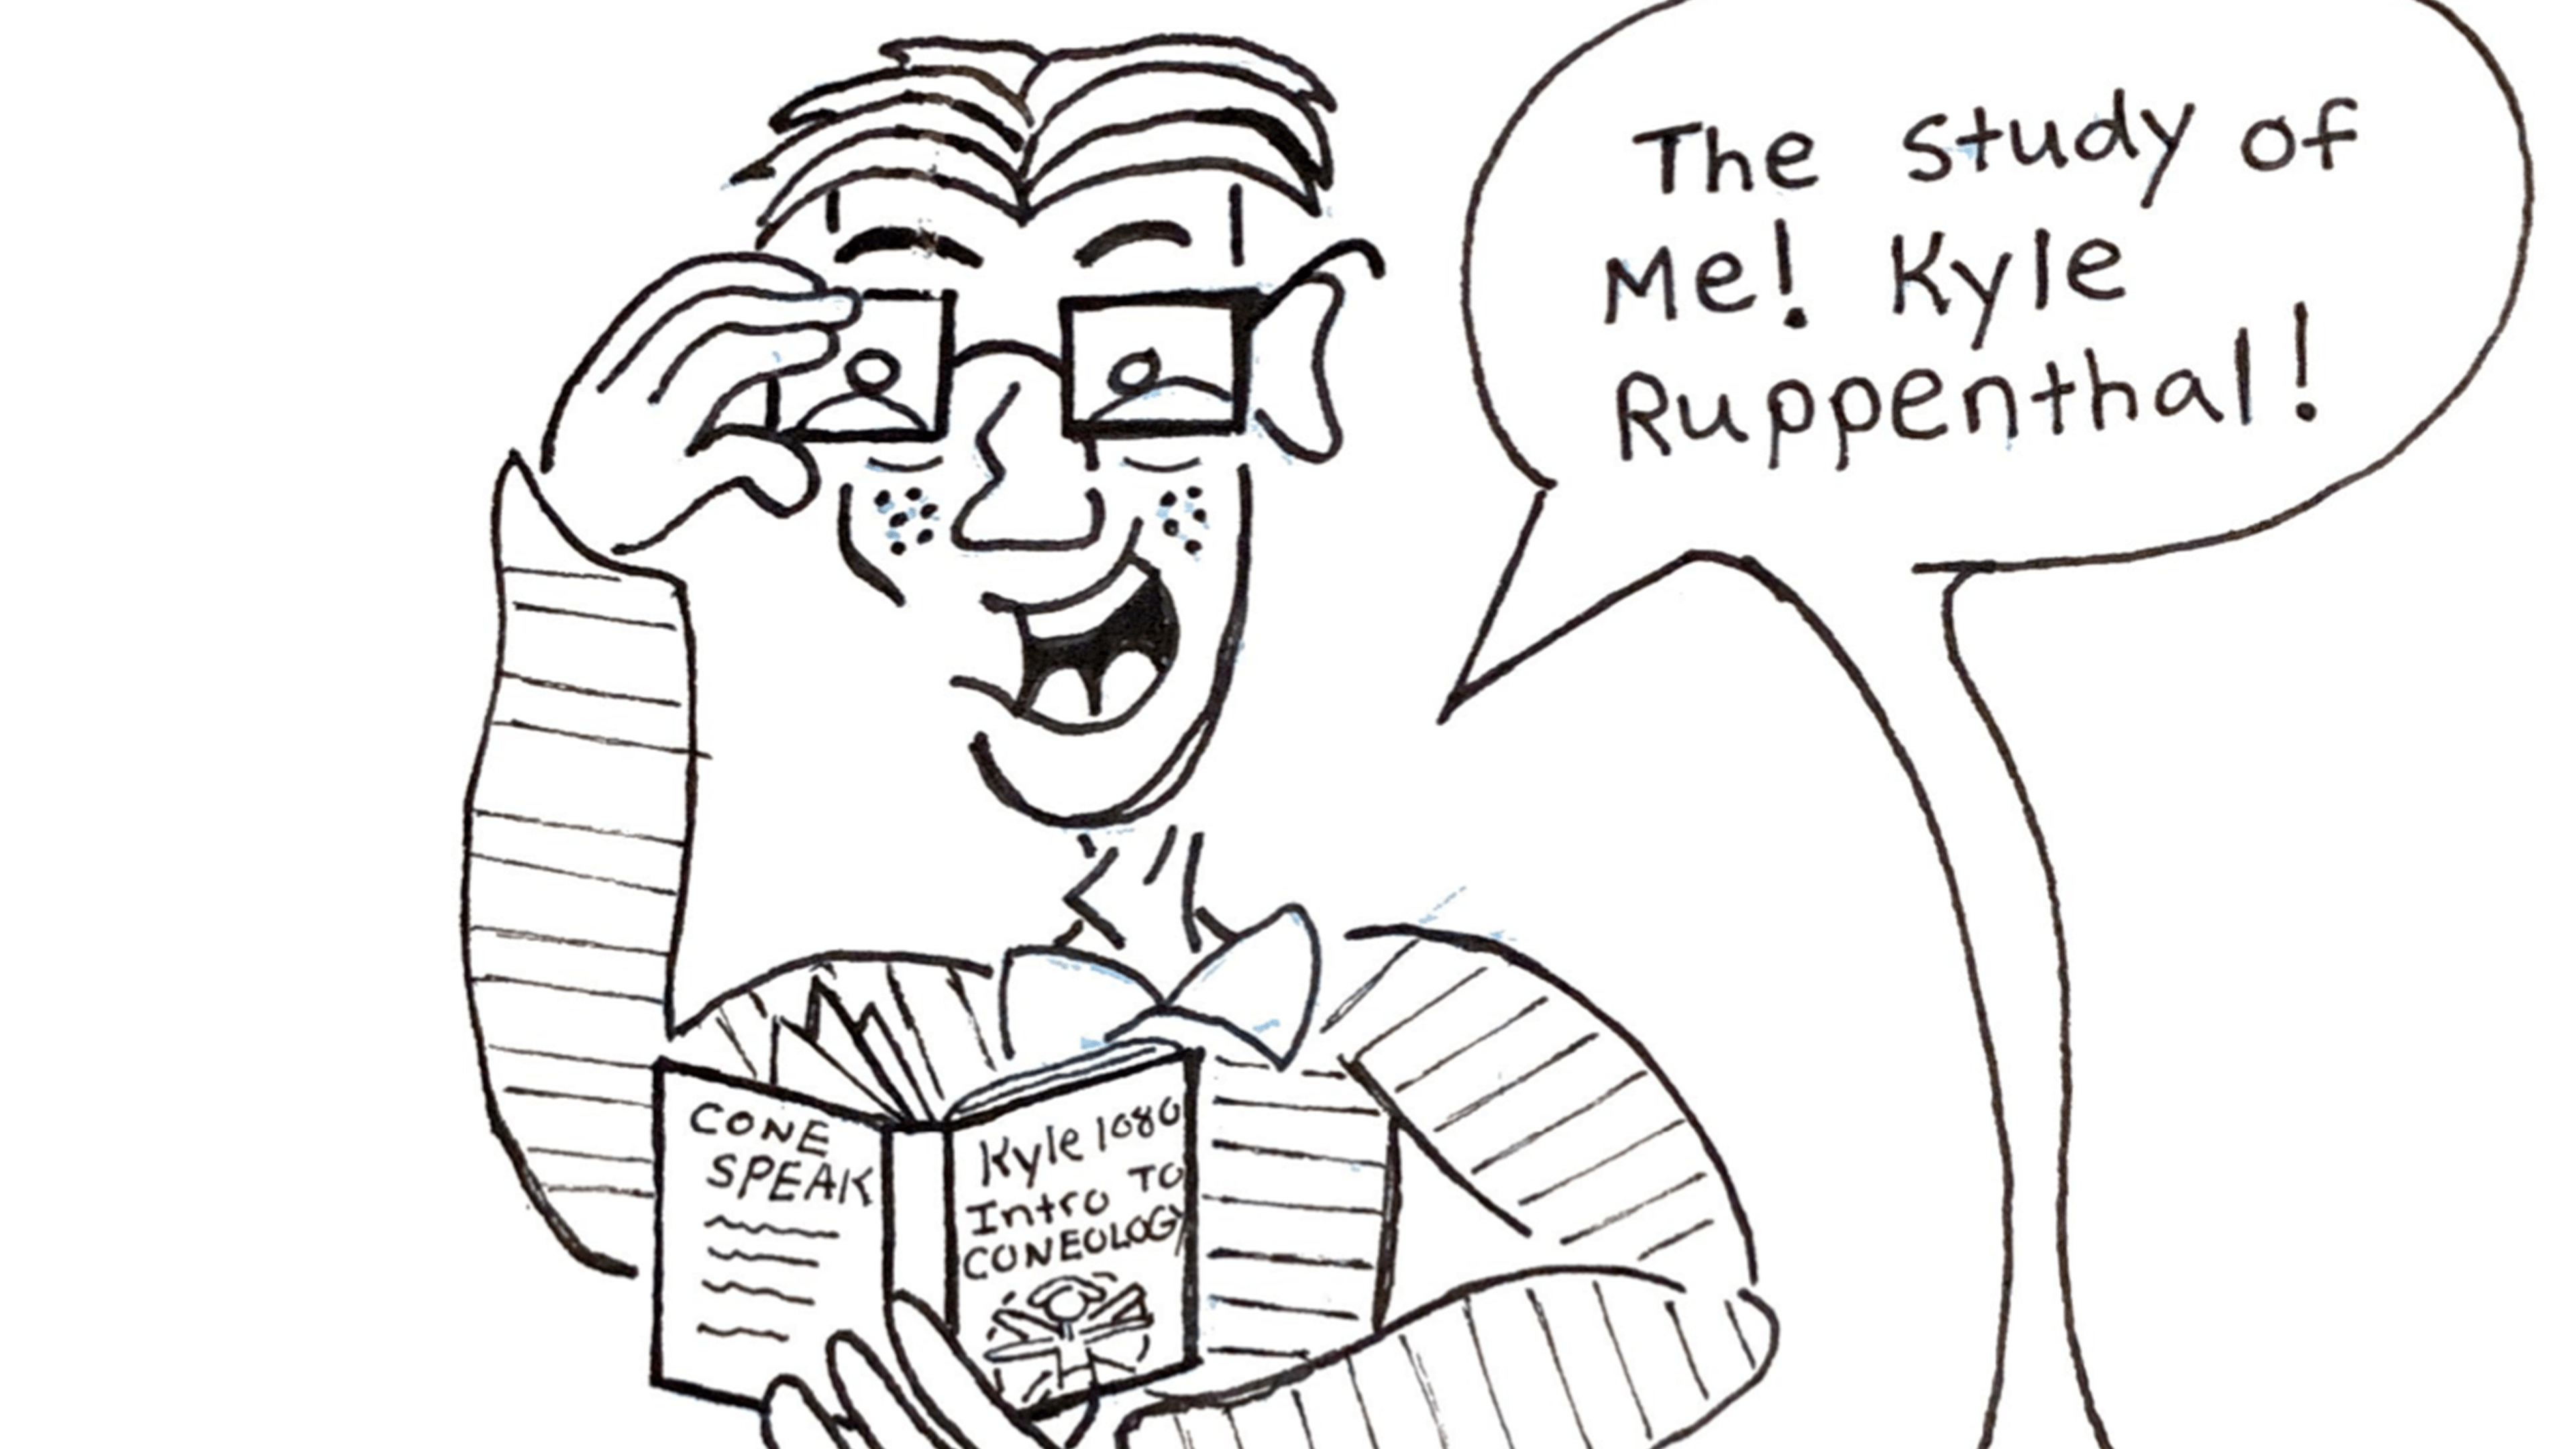 First page of kyle's comic. Contains a drawing of himself and the text "the study of me! kyle ruppenthal!" in a speech bubble